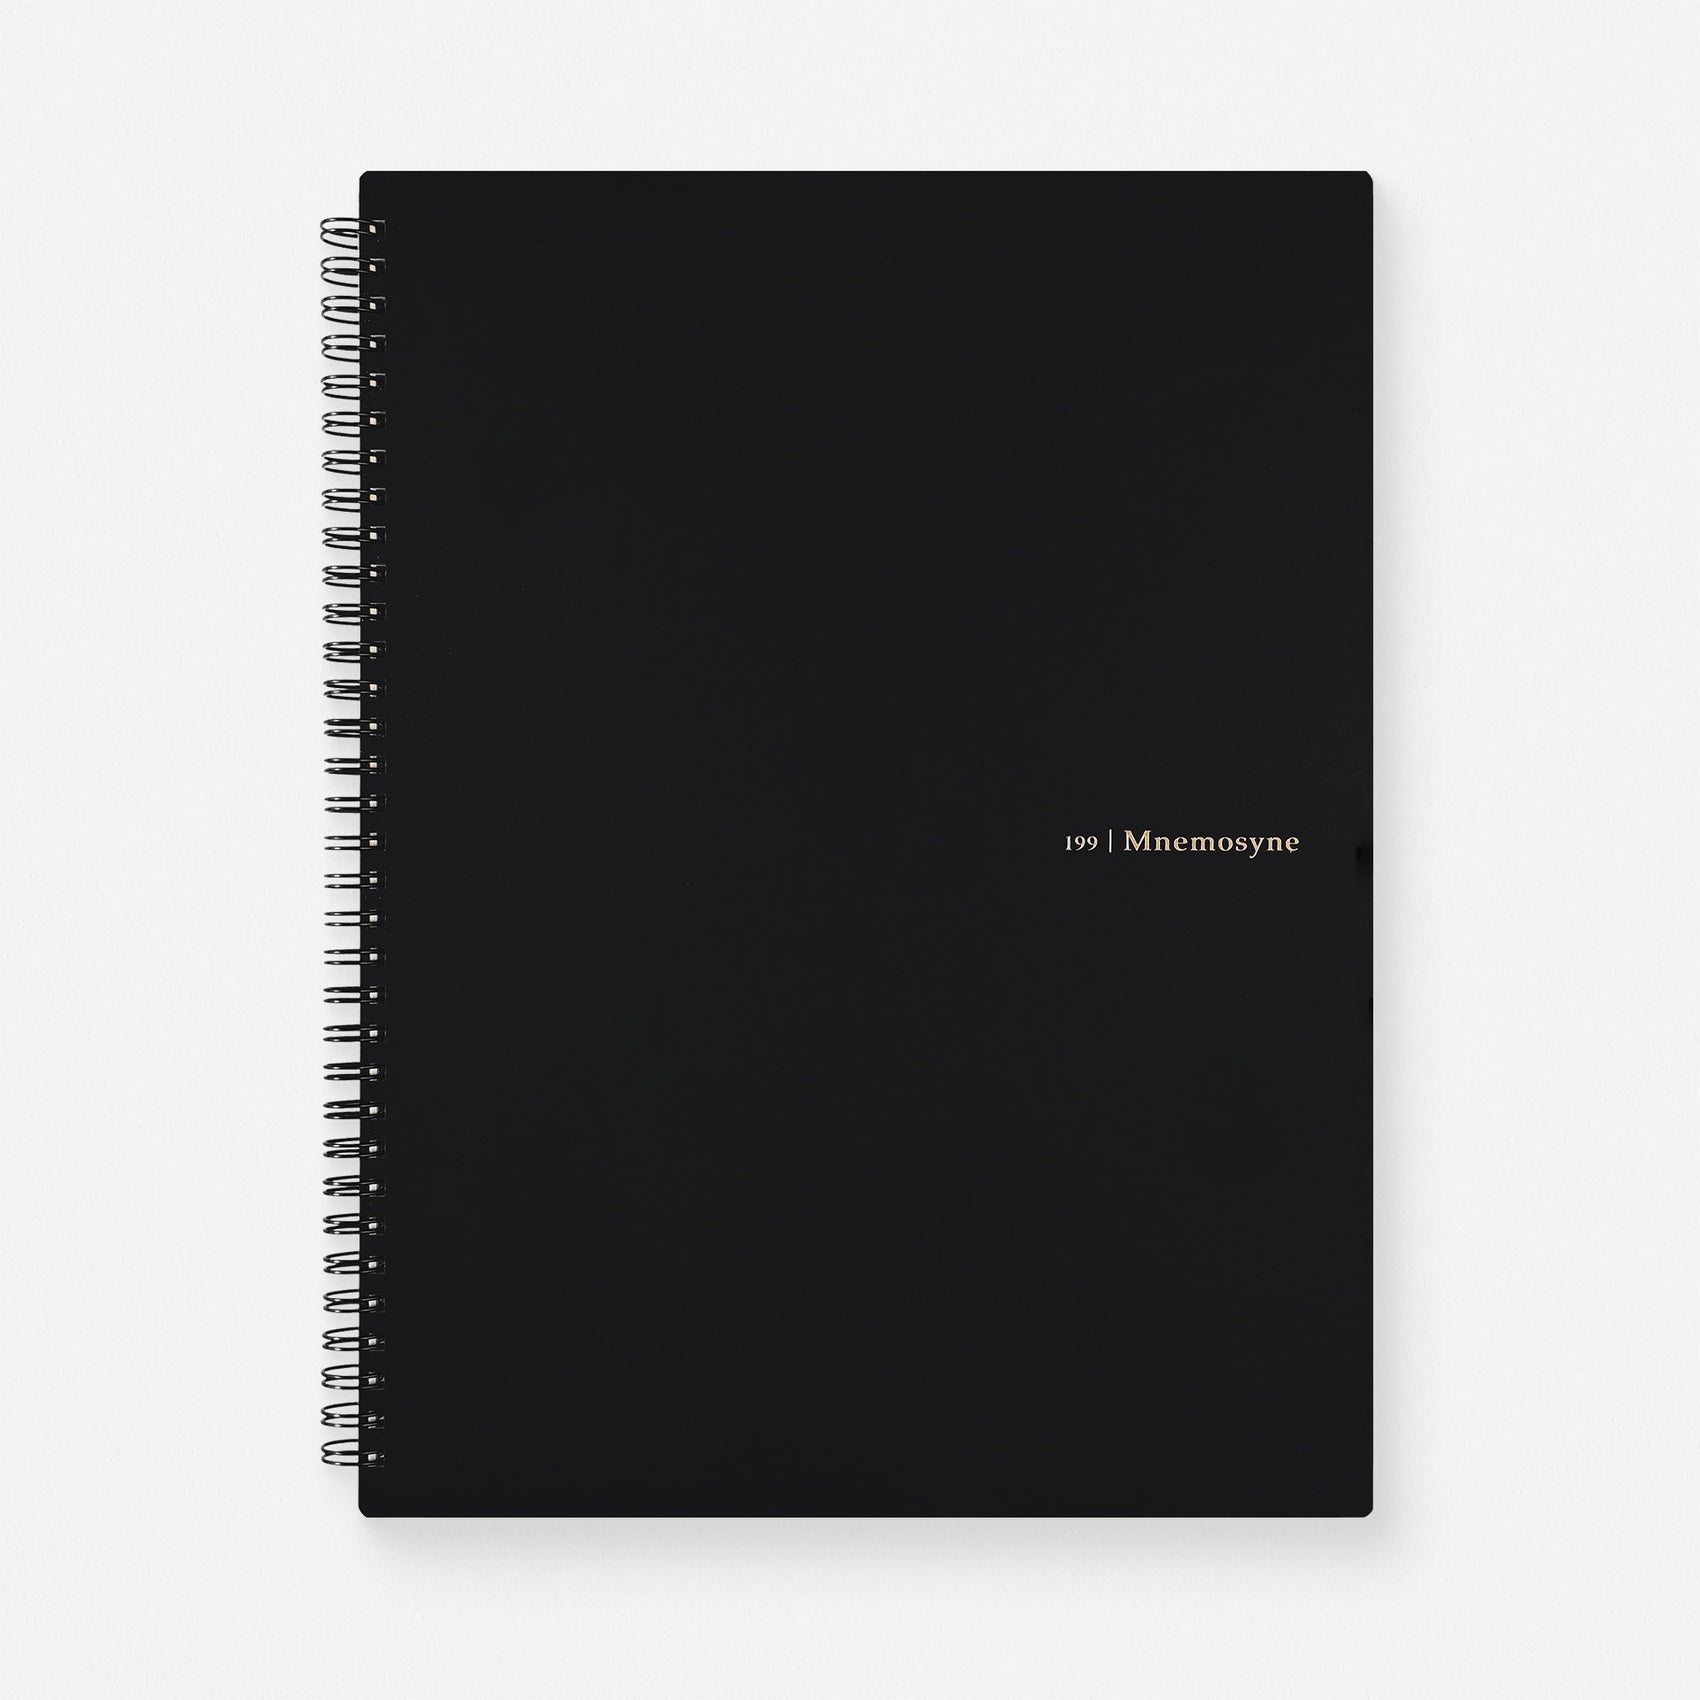 Mnemosyne 199 A4 Notebook Lined